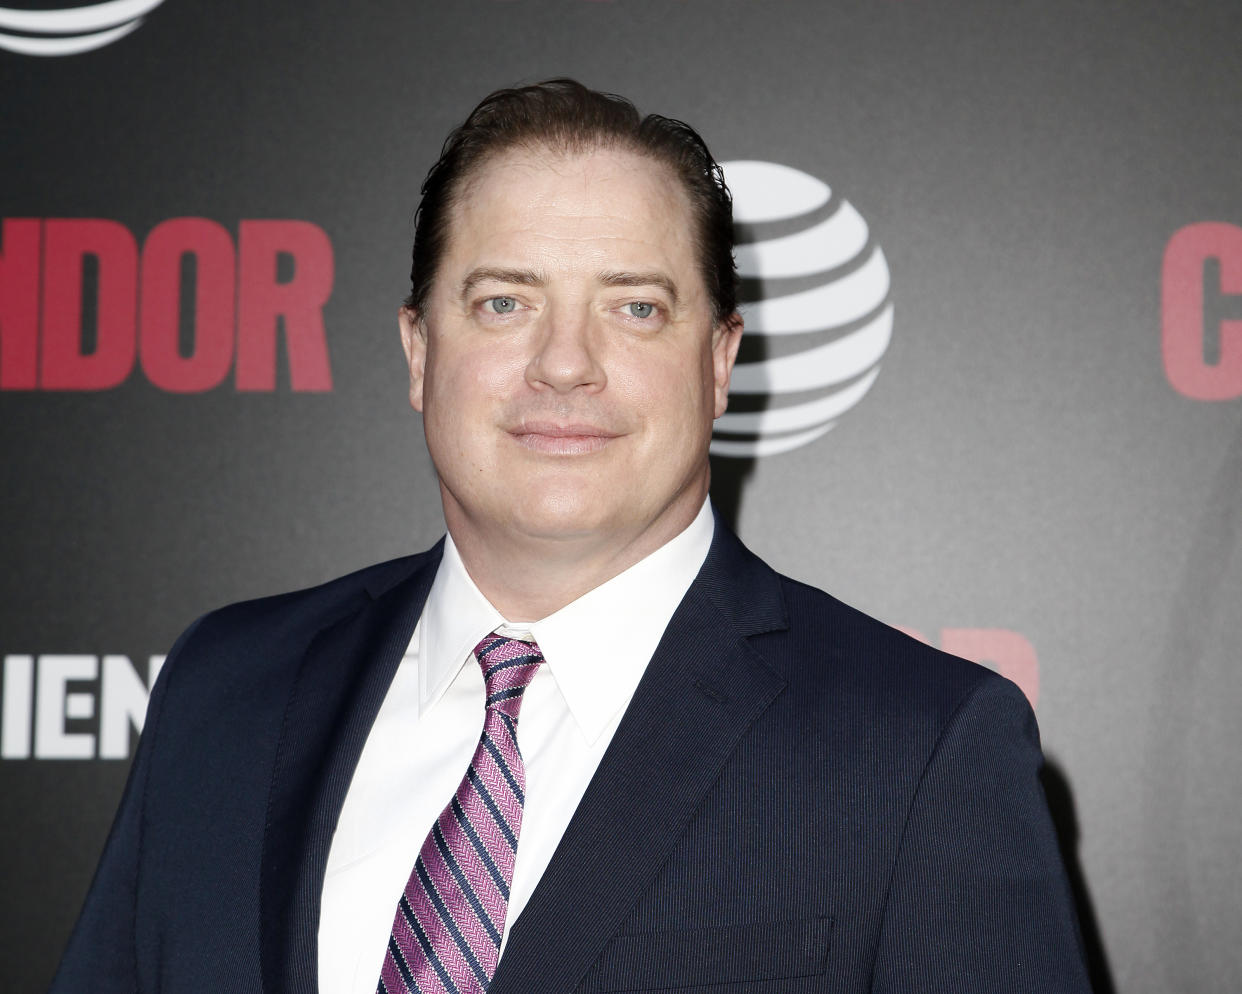 LOS ANGELES, CA - JUNE 06:  Brendan Fraser attends the premiere of AT&T Audience Network's 'Condor' at NeueHouse Hollywood on June 6, 2018 in Los Angeles, California.  (Photo by Tibrina Hobson/Getty Images)